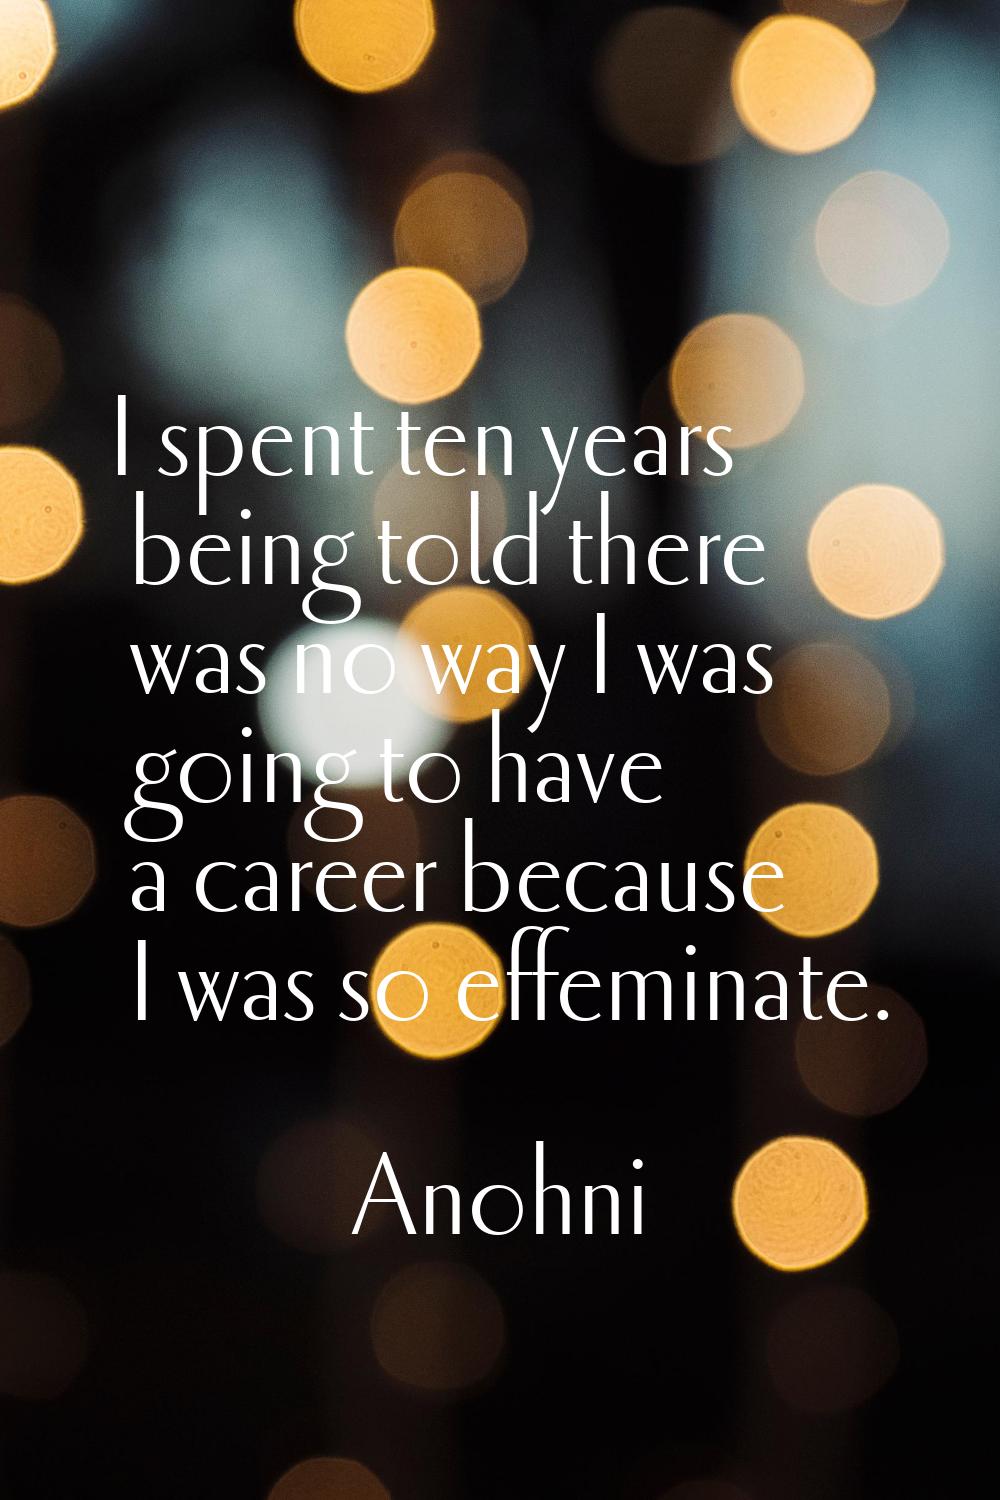 I spent ten years being told there was no way I was going to have a career because I was so effemin